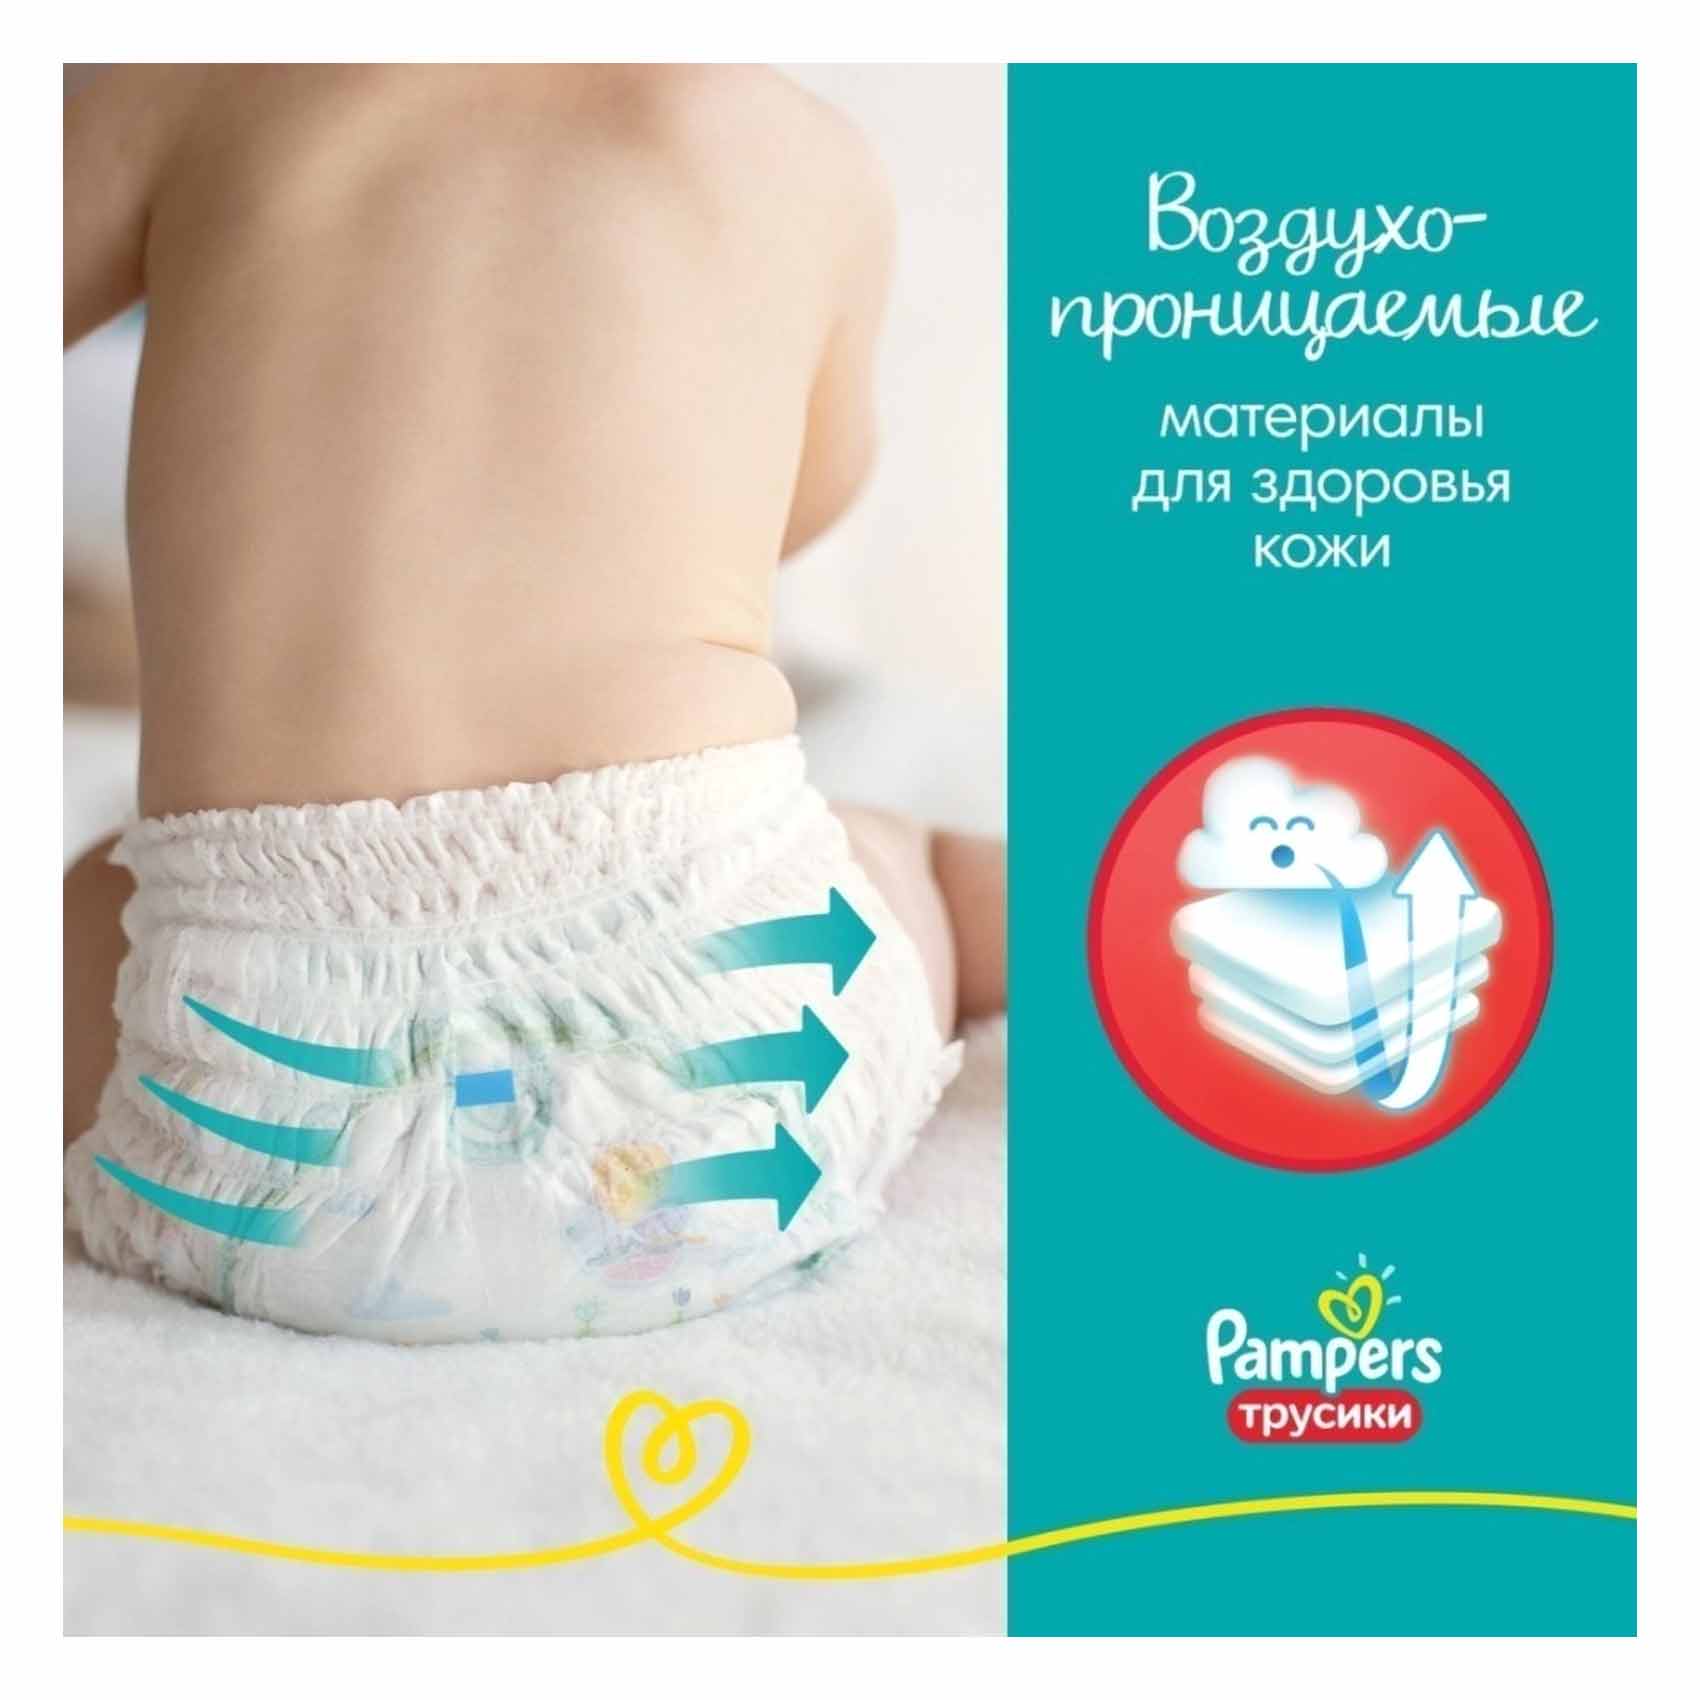 Pampers Baby Pants Diapers Jumbo Pack Medium Size 3 60 Count 6-11 KG